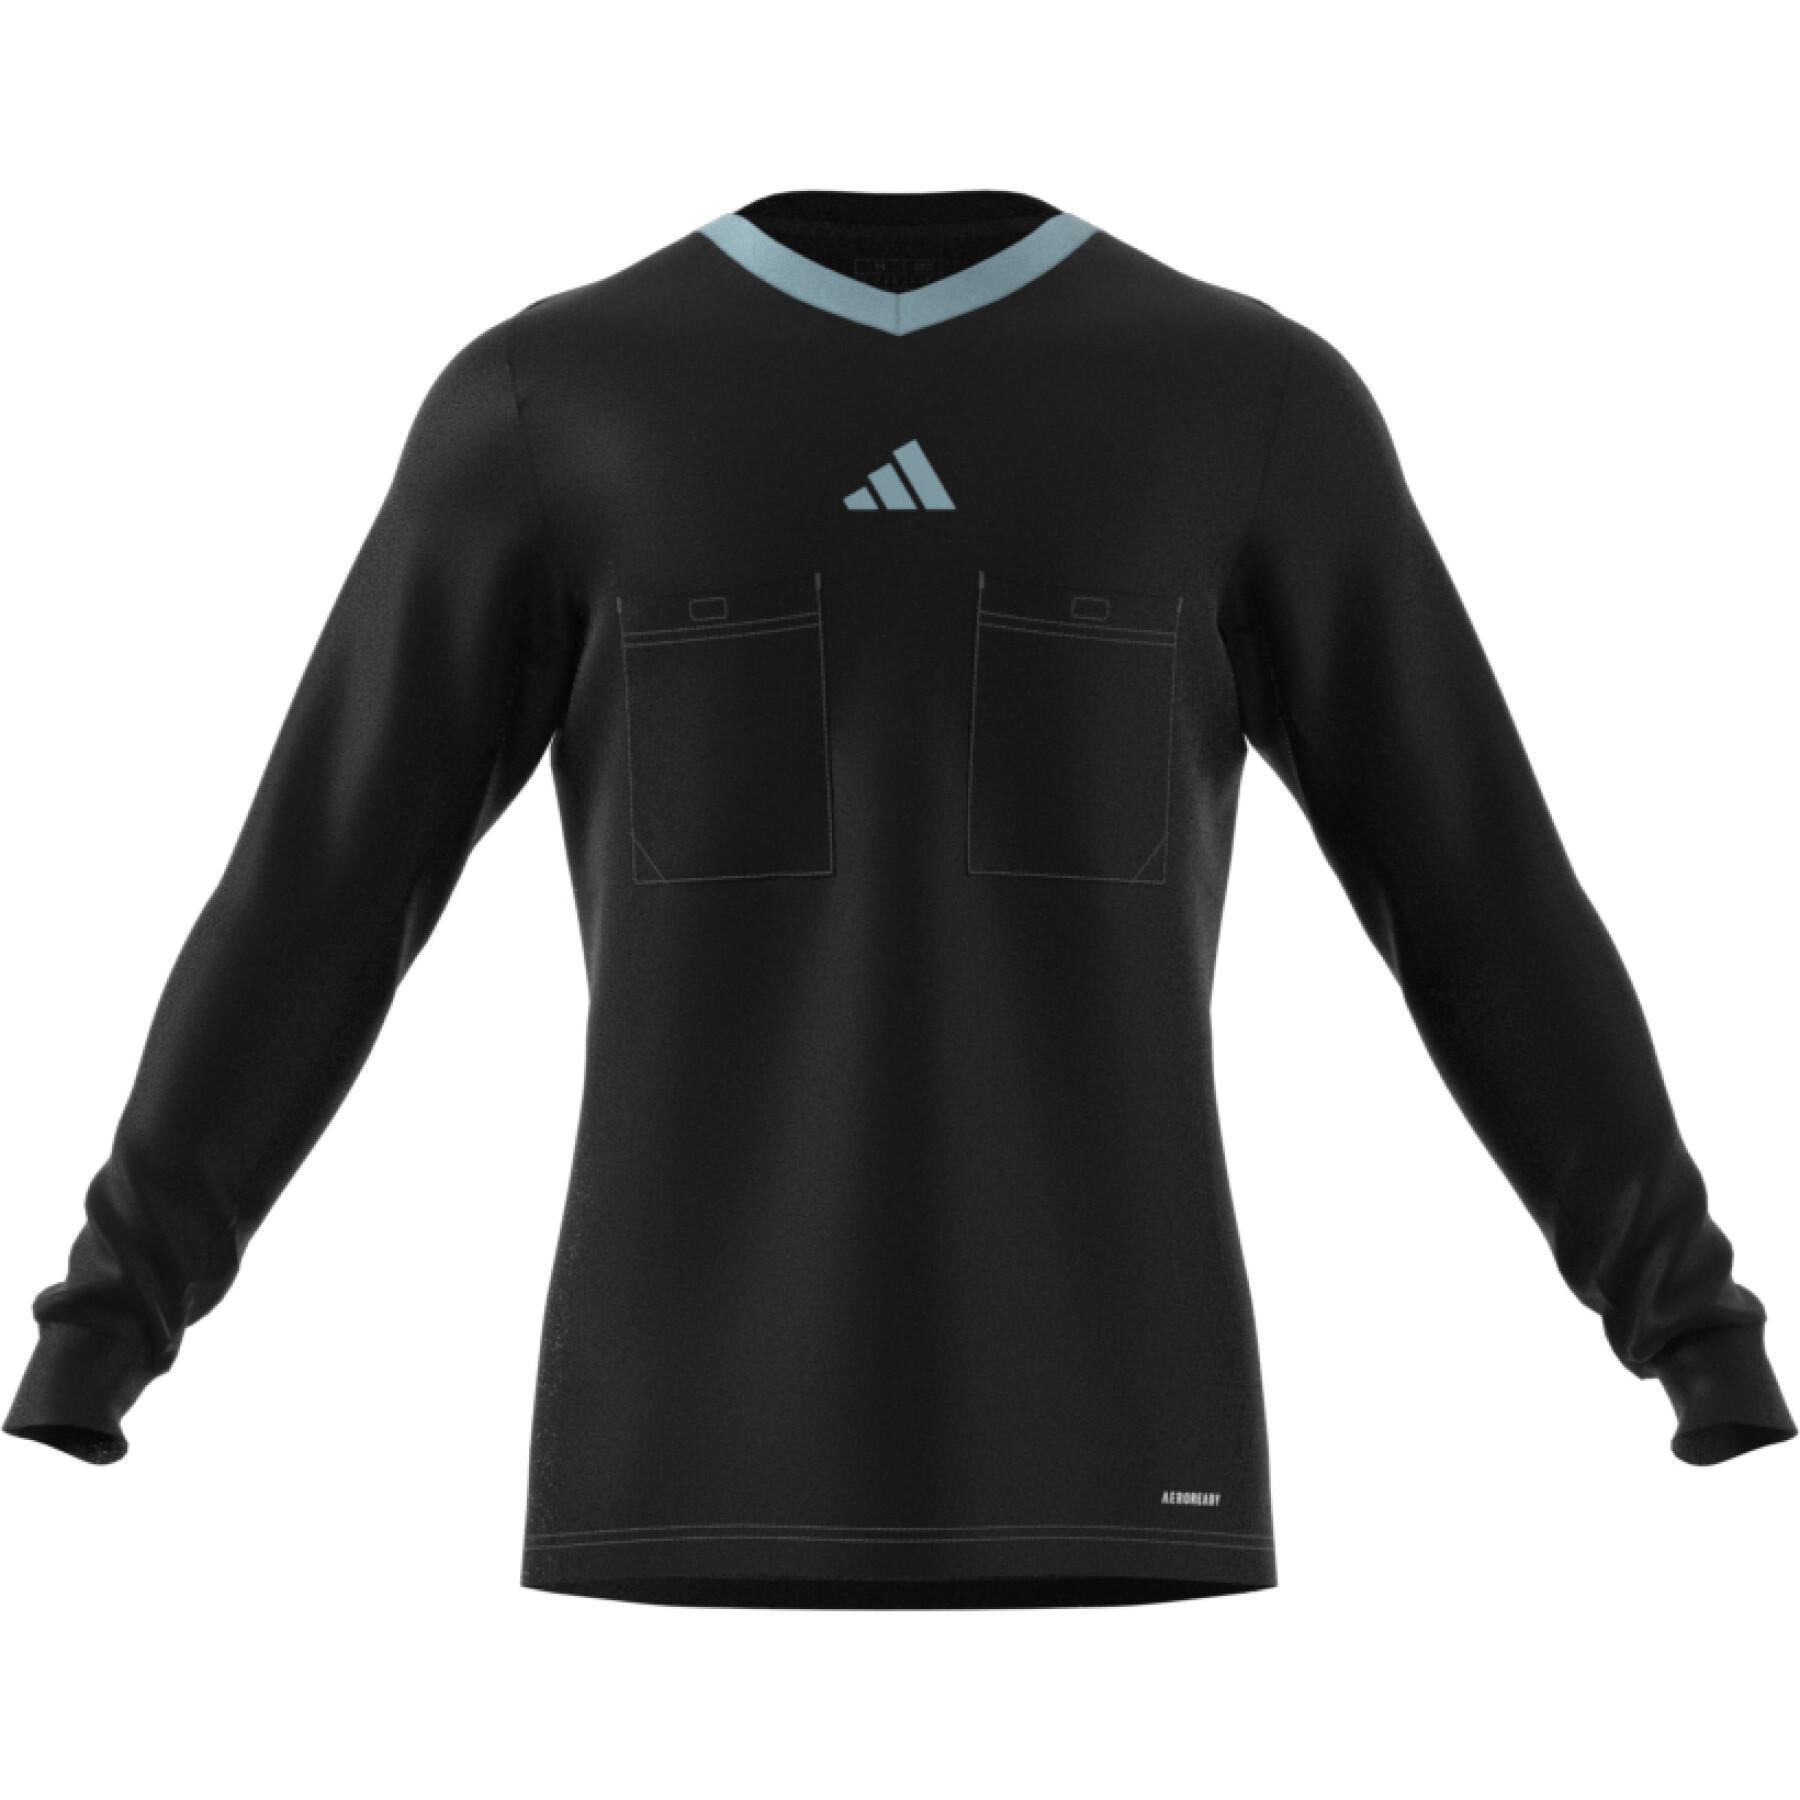 Maillot manches longues adidas Ref 22